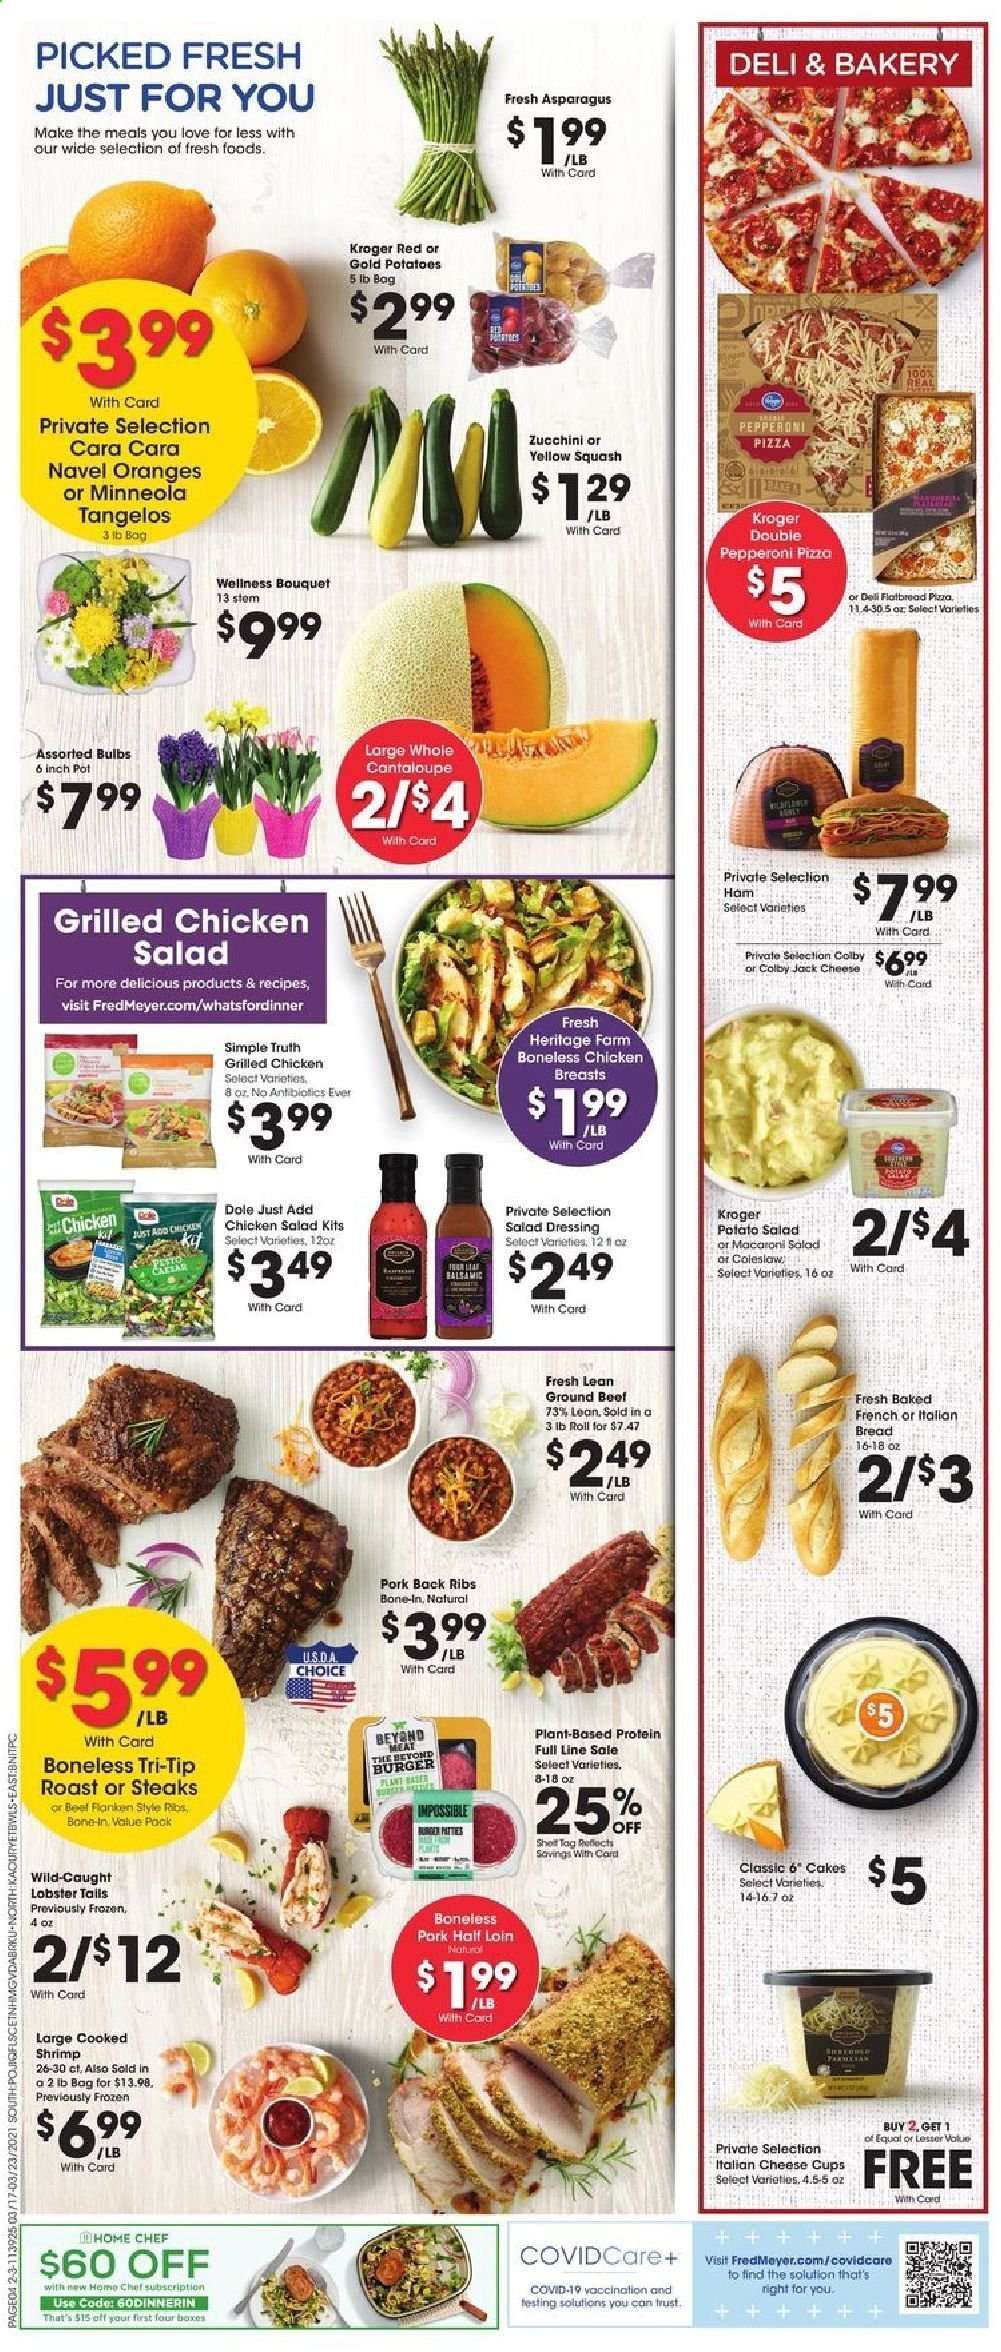 thumbnail - Fred Meyer Flyer - 03/17/2021 - 03/23/2021 - Sales products - cantaloupe, zucchini, Dole, tangelos, Trust, bread, flatbread, cake, oranges, lobster, lobster tail, shrimps, coleslaw, hamburger, pepperoni, potato salad, macaroni salad, chicken salad, Colby cheese, cheese cup, cheese, salad dressing, dressing, beef meat, ground beef, steak, pork meat, pork back ribs, pot, cup, bulb, bouquet. Page 4.